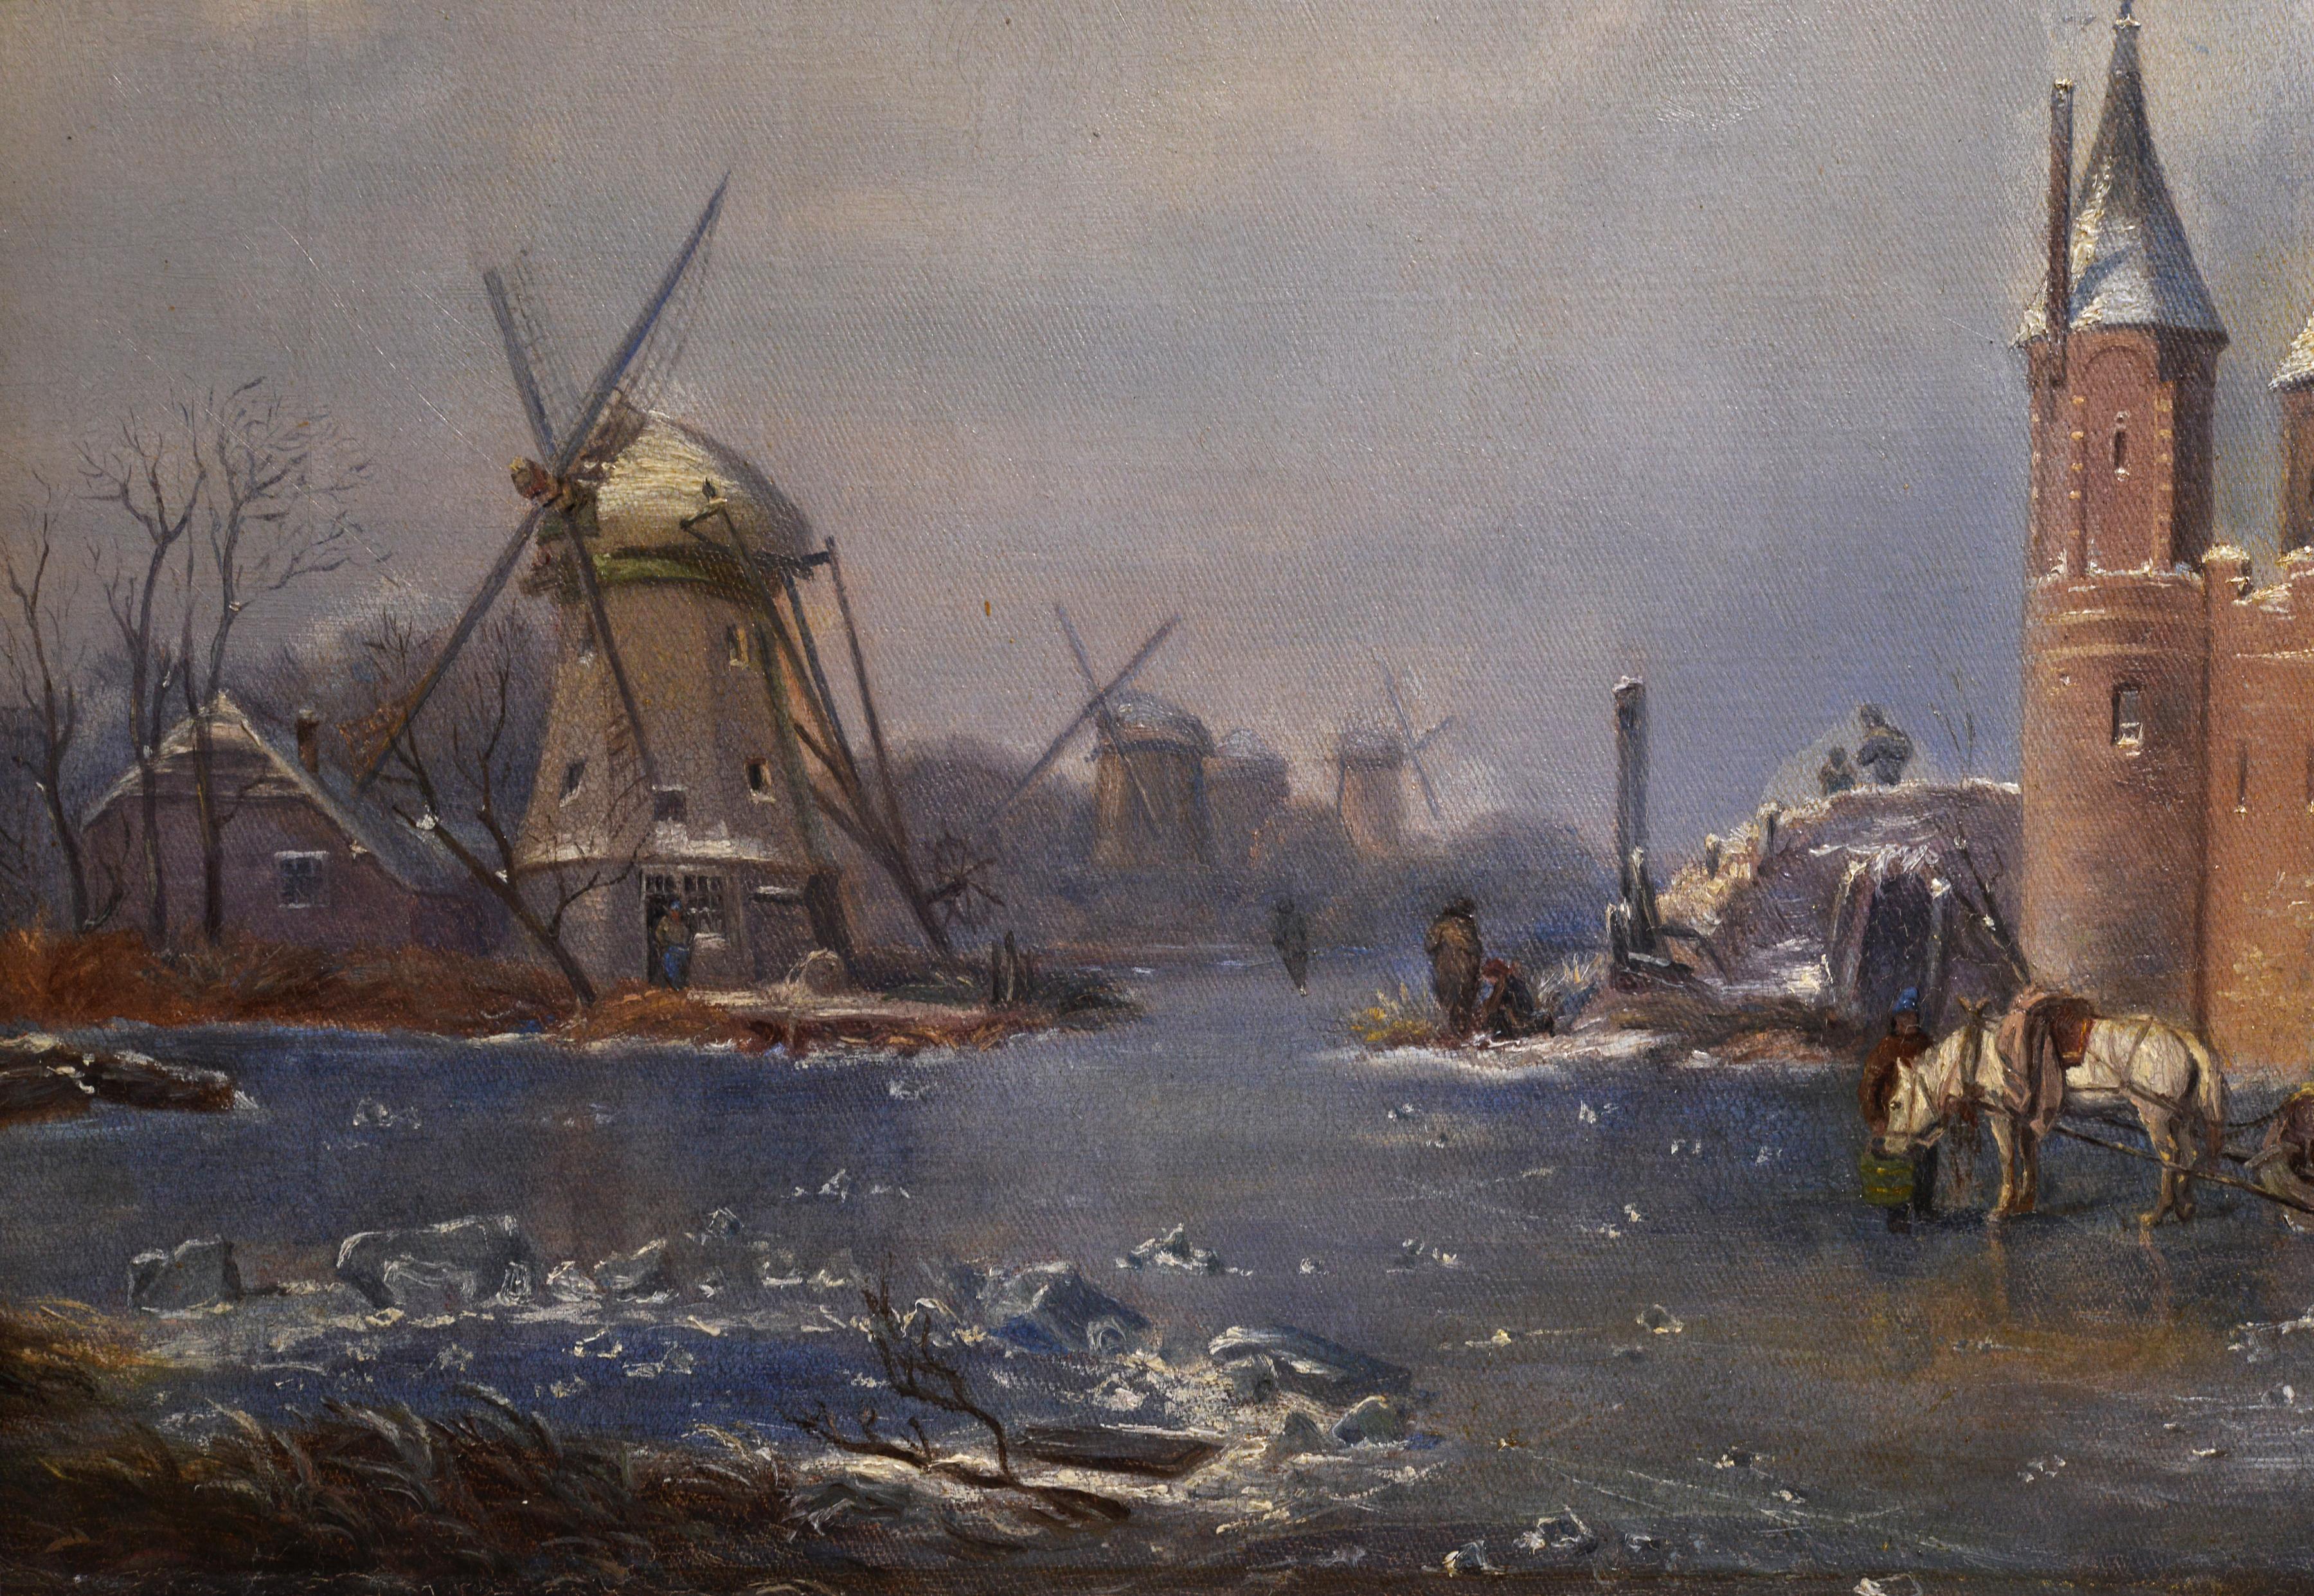 Castle and Windmills at Frozen Pond Dutch Winter Landscape 19th century Oil - Dutch School Painting by Unknown